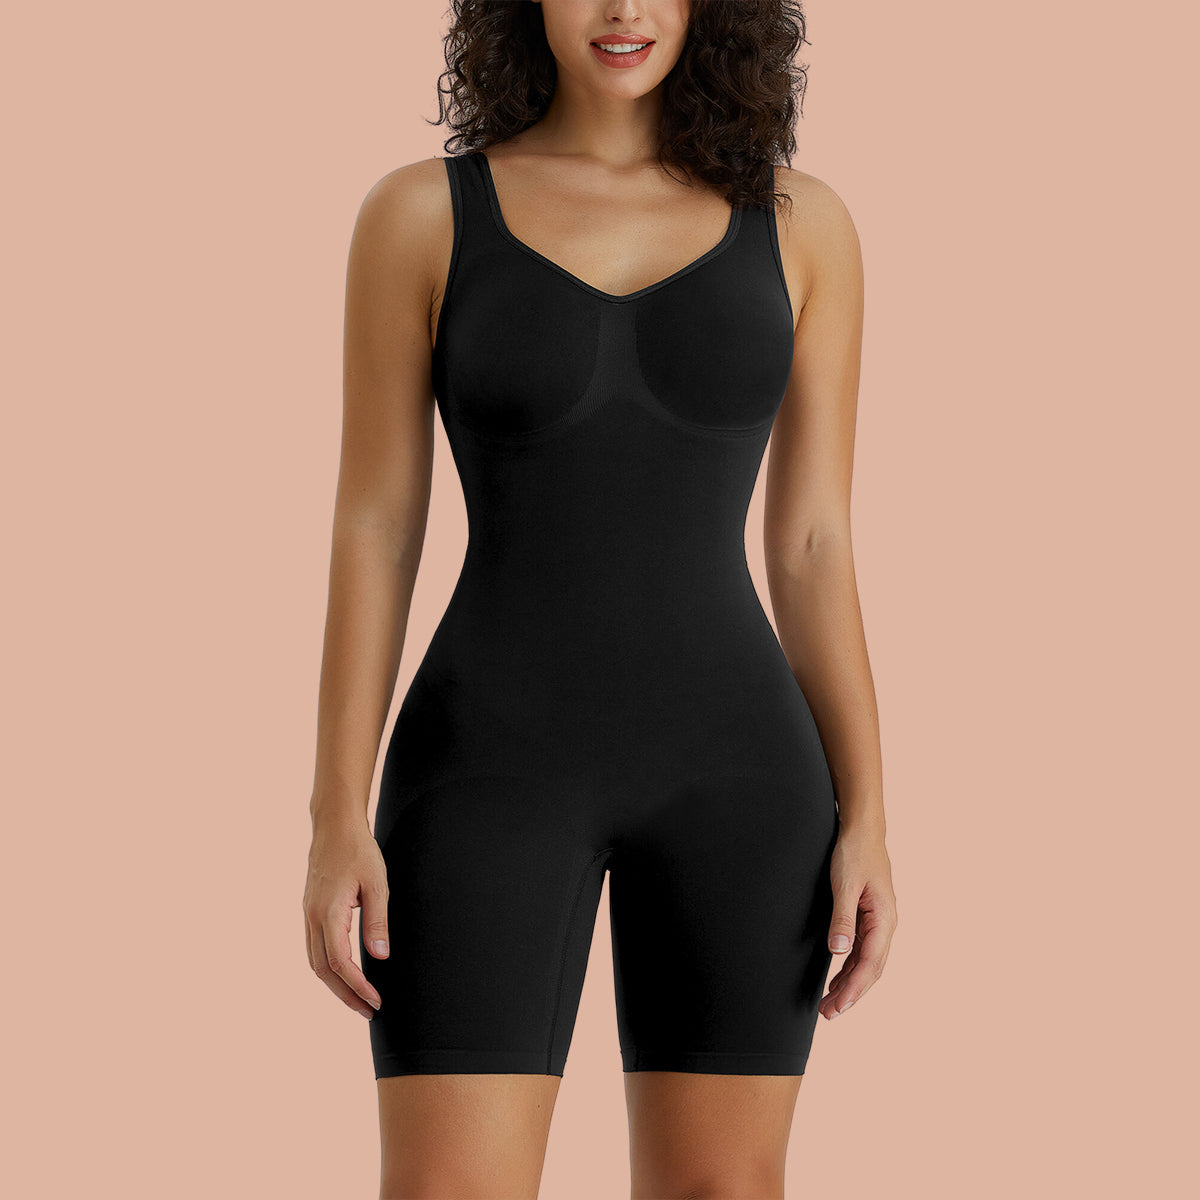  Mid-Thigh Arm Control Bodysuit. Full Body Shaper with Arm  Shapewear by Your Contour (Black, Large) : Clothing, Shoes & Jewelry